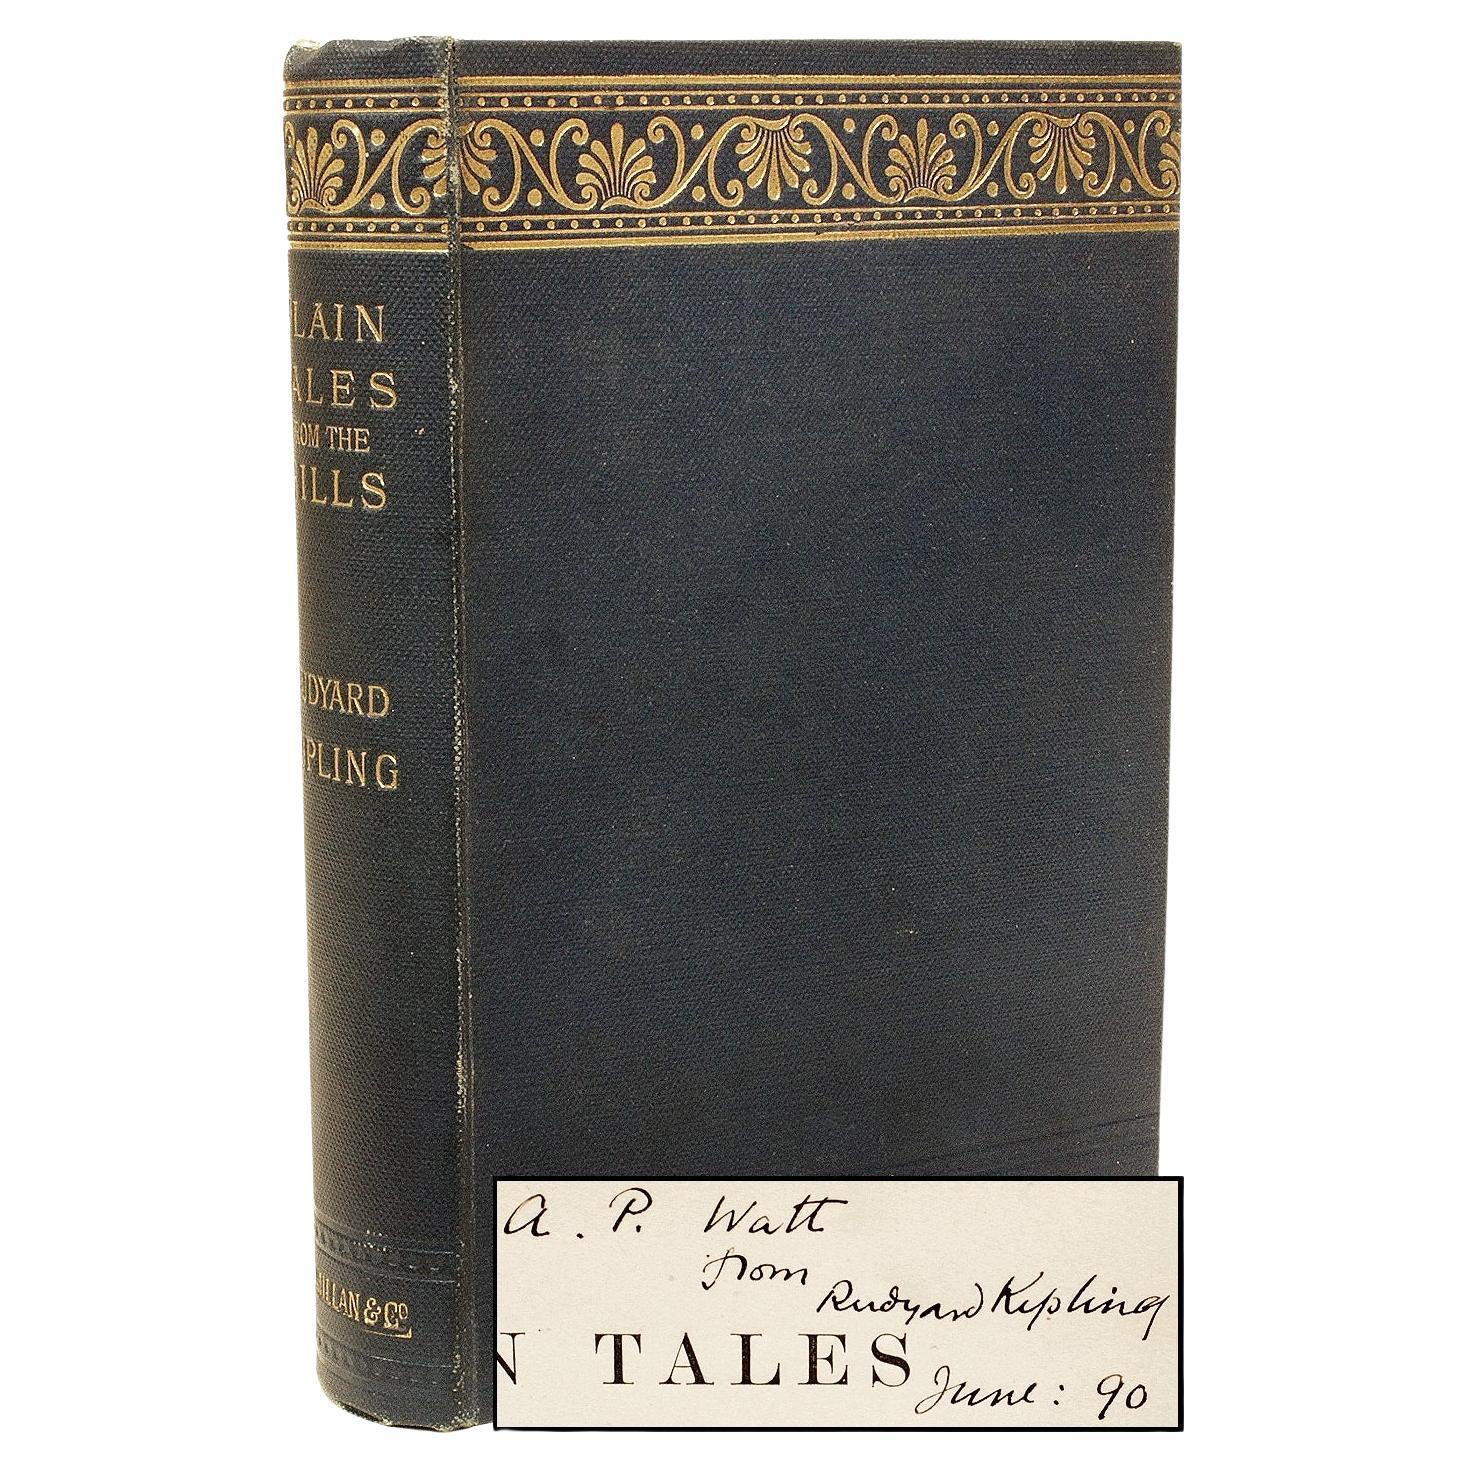 Rudyard KIPLING. Plain Tales From The Hills. THIRD EDITION - PRESENTATION COPY ! For Sale